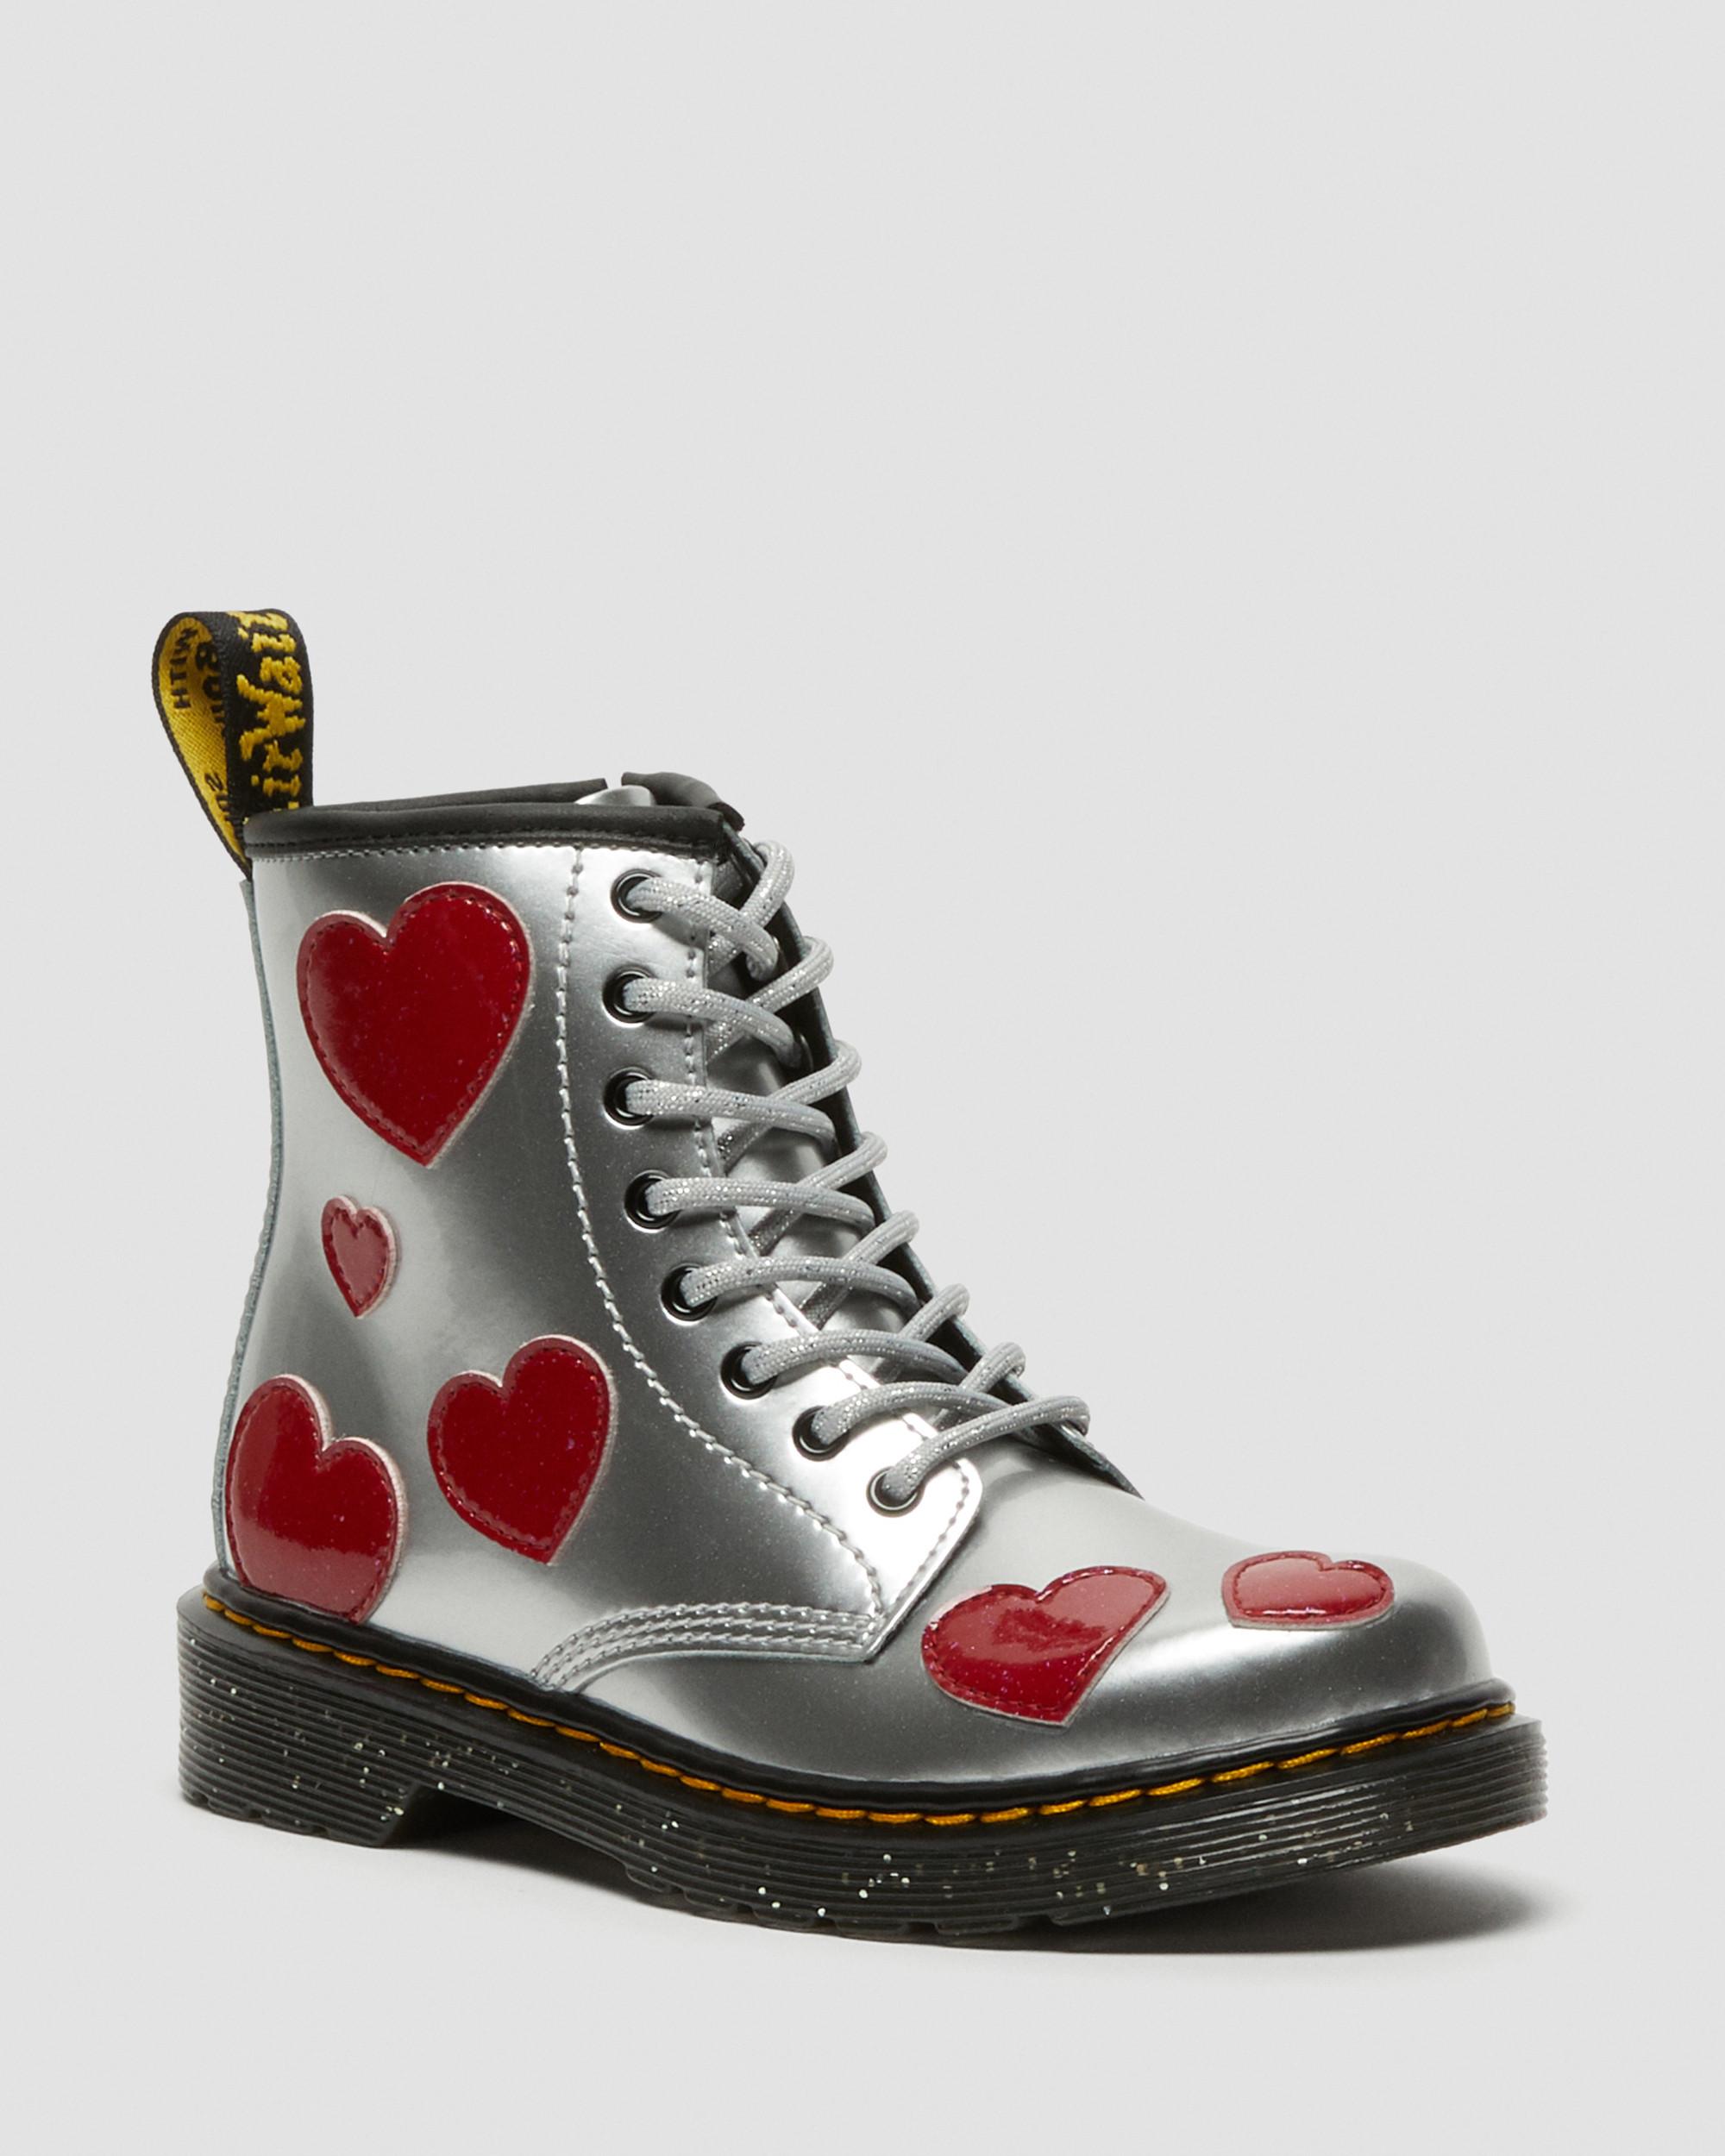 Metallic Up in Star Boots Glitter Junior Martens Lace | Dr. Patent 1460